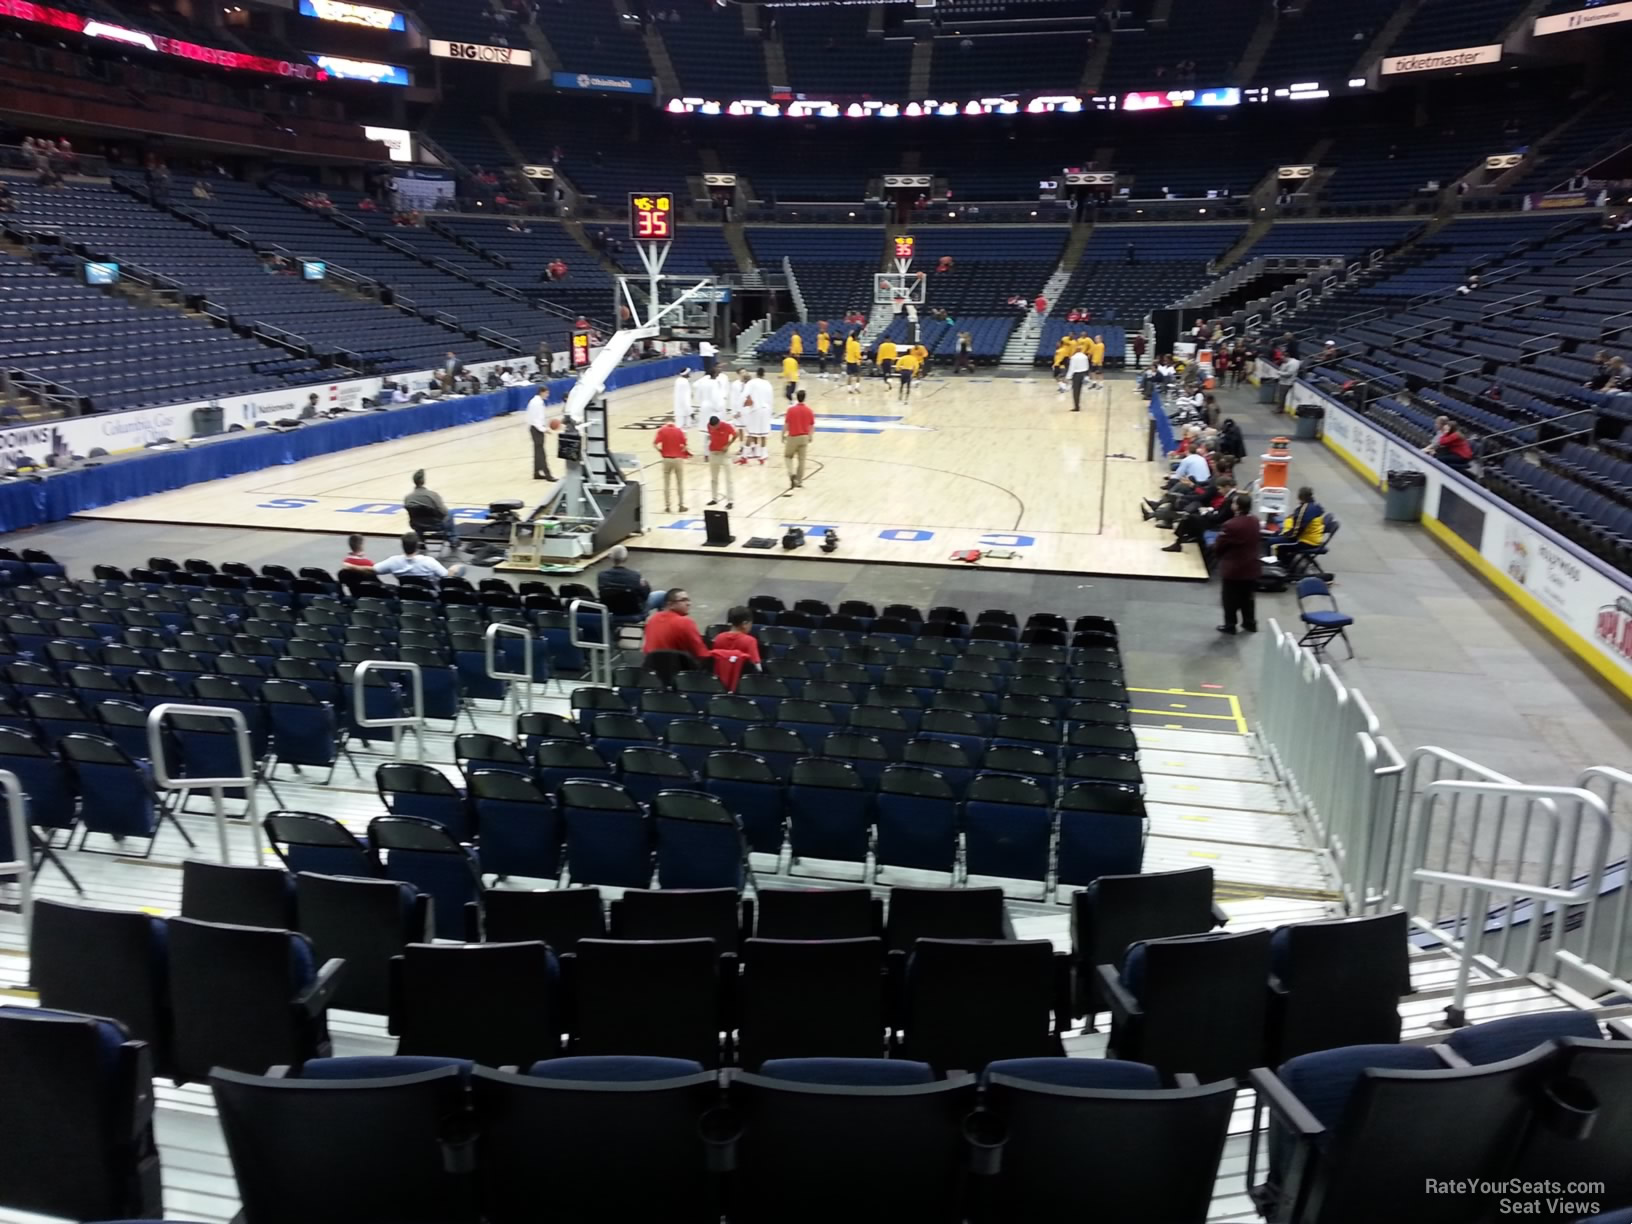 section 108, row g seat view  for basketball - nationwide arena